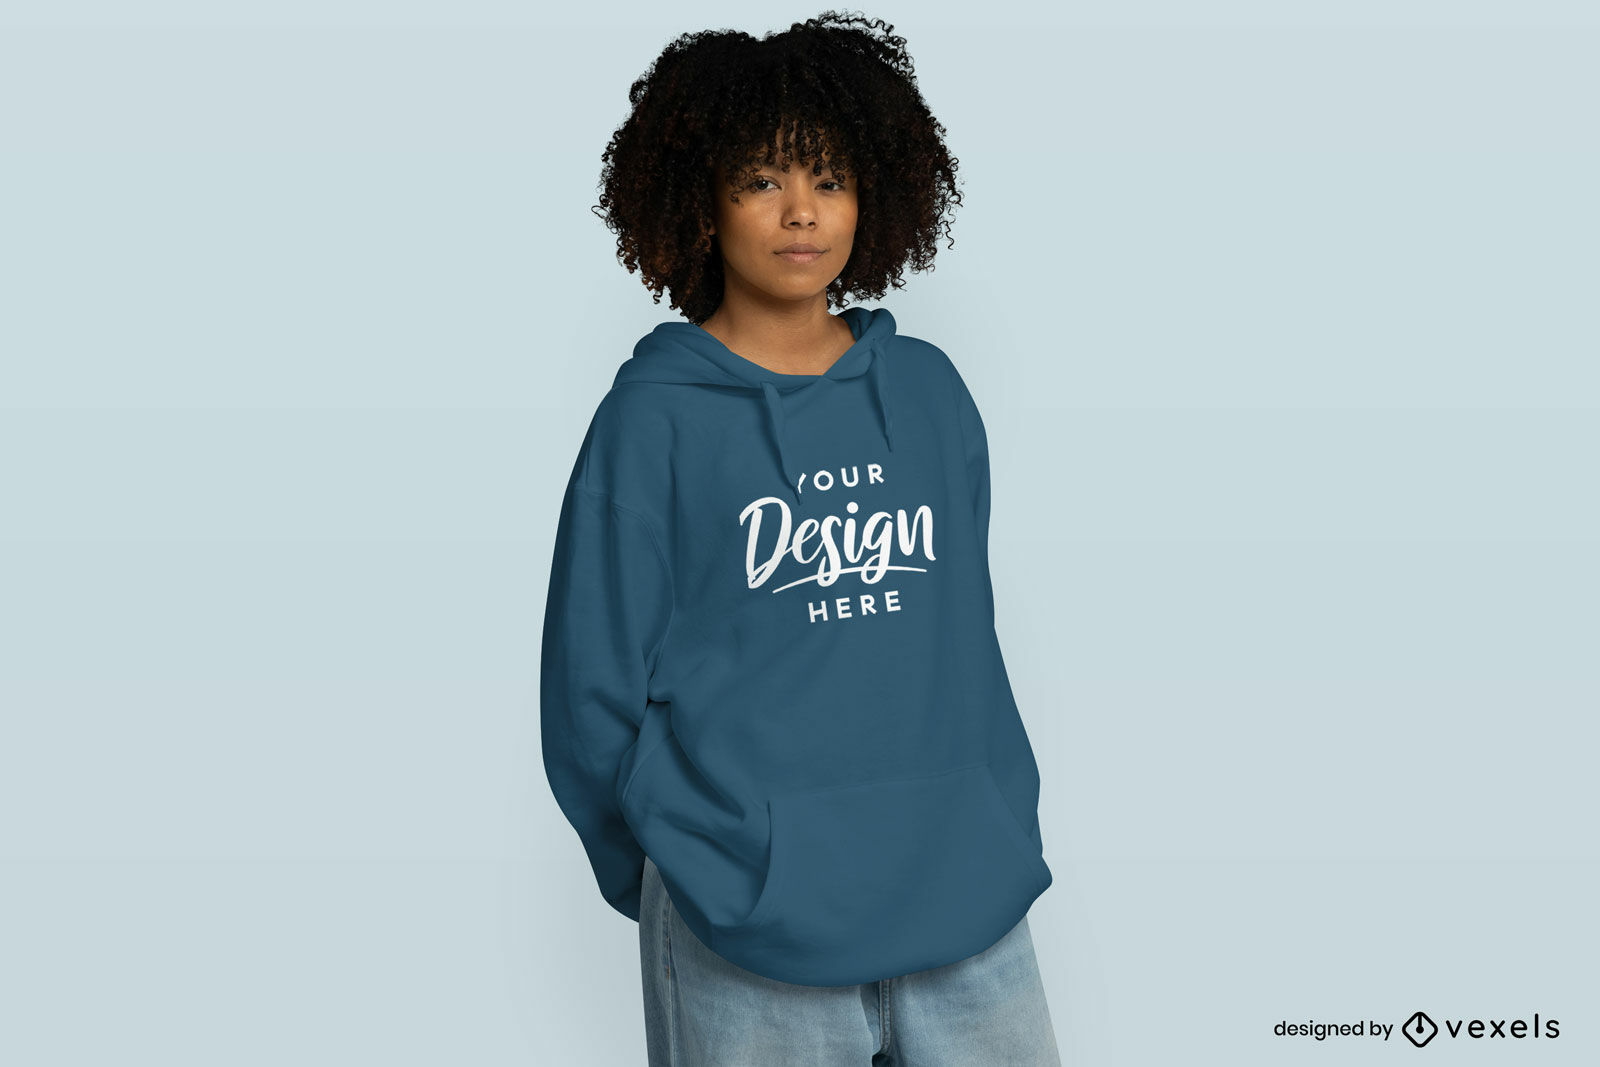 Black girl with afro in hoodie mockup